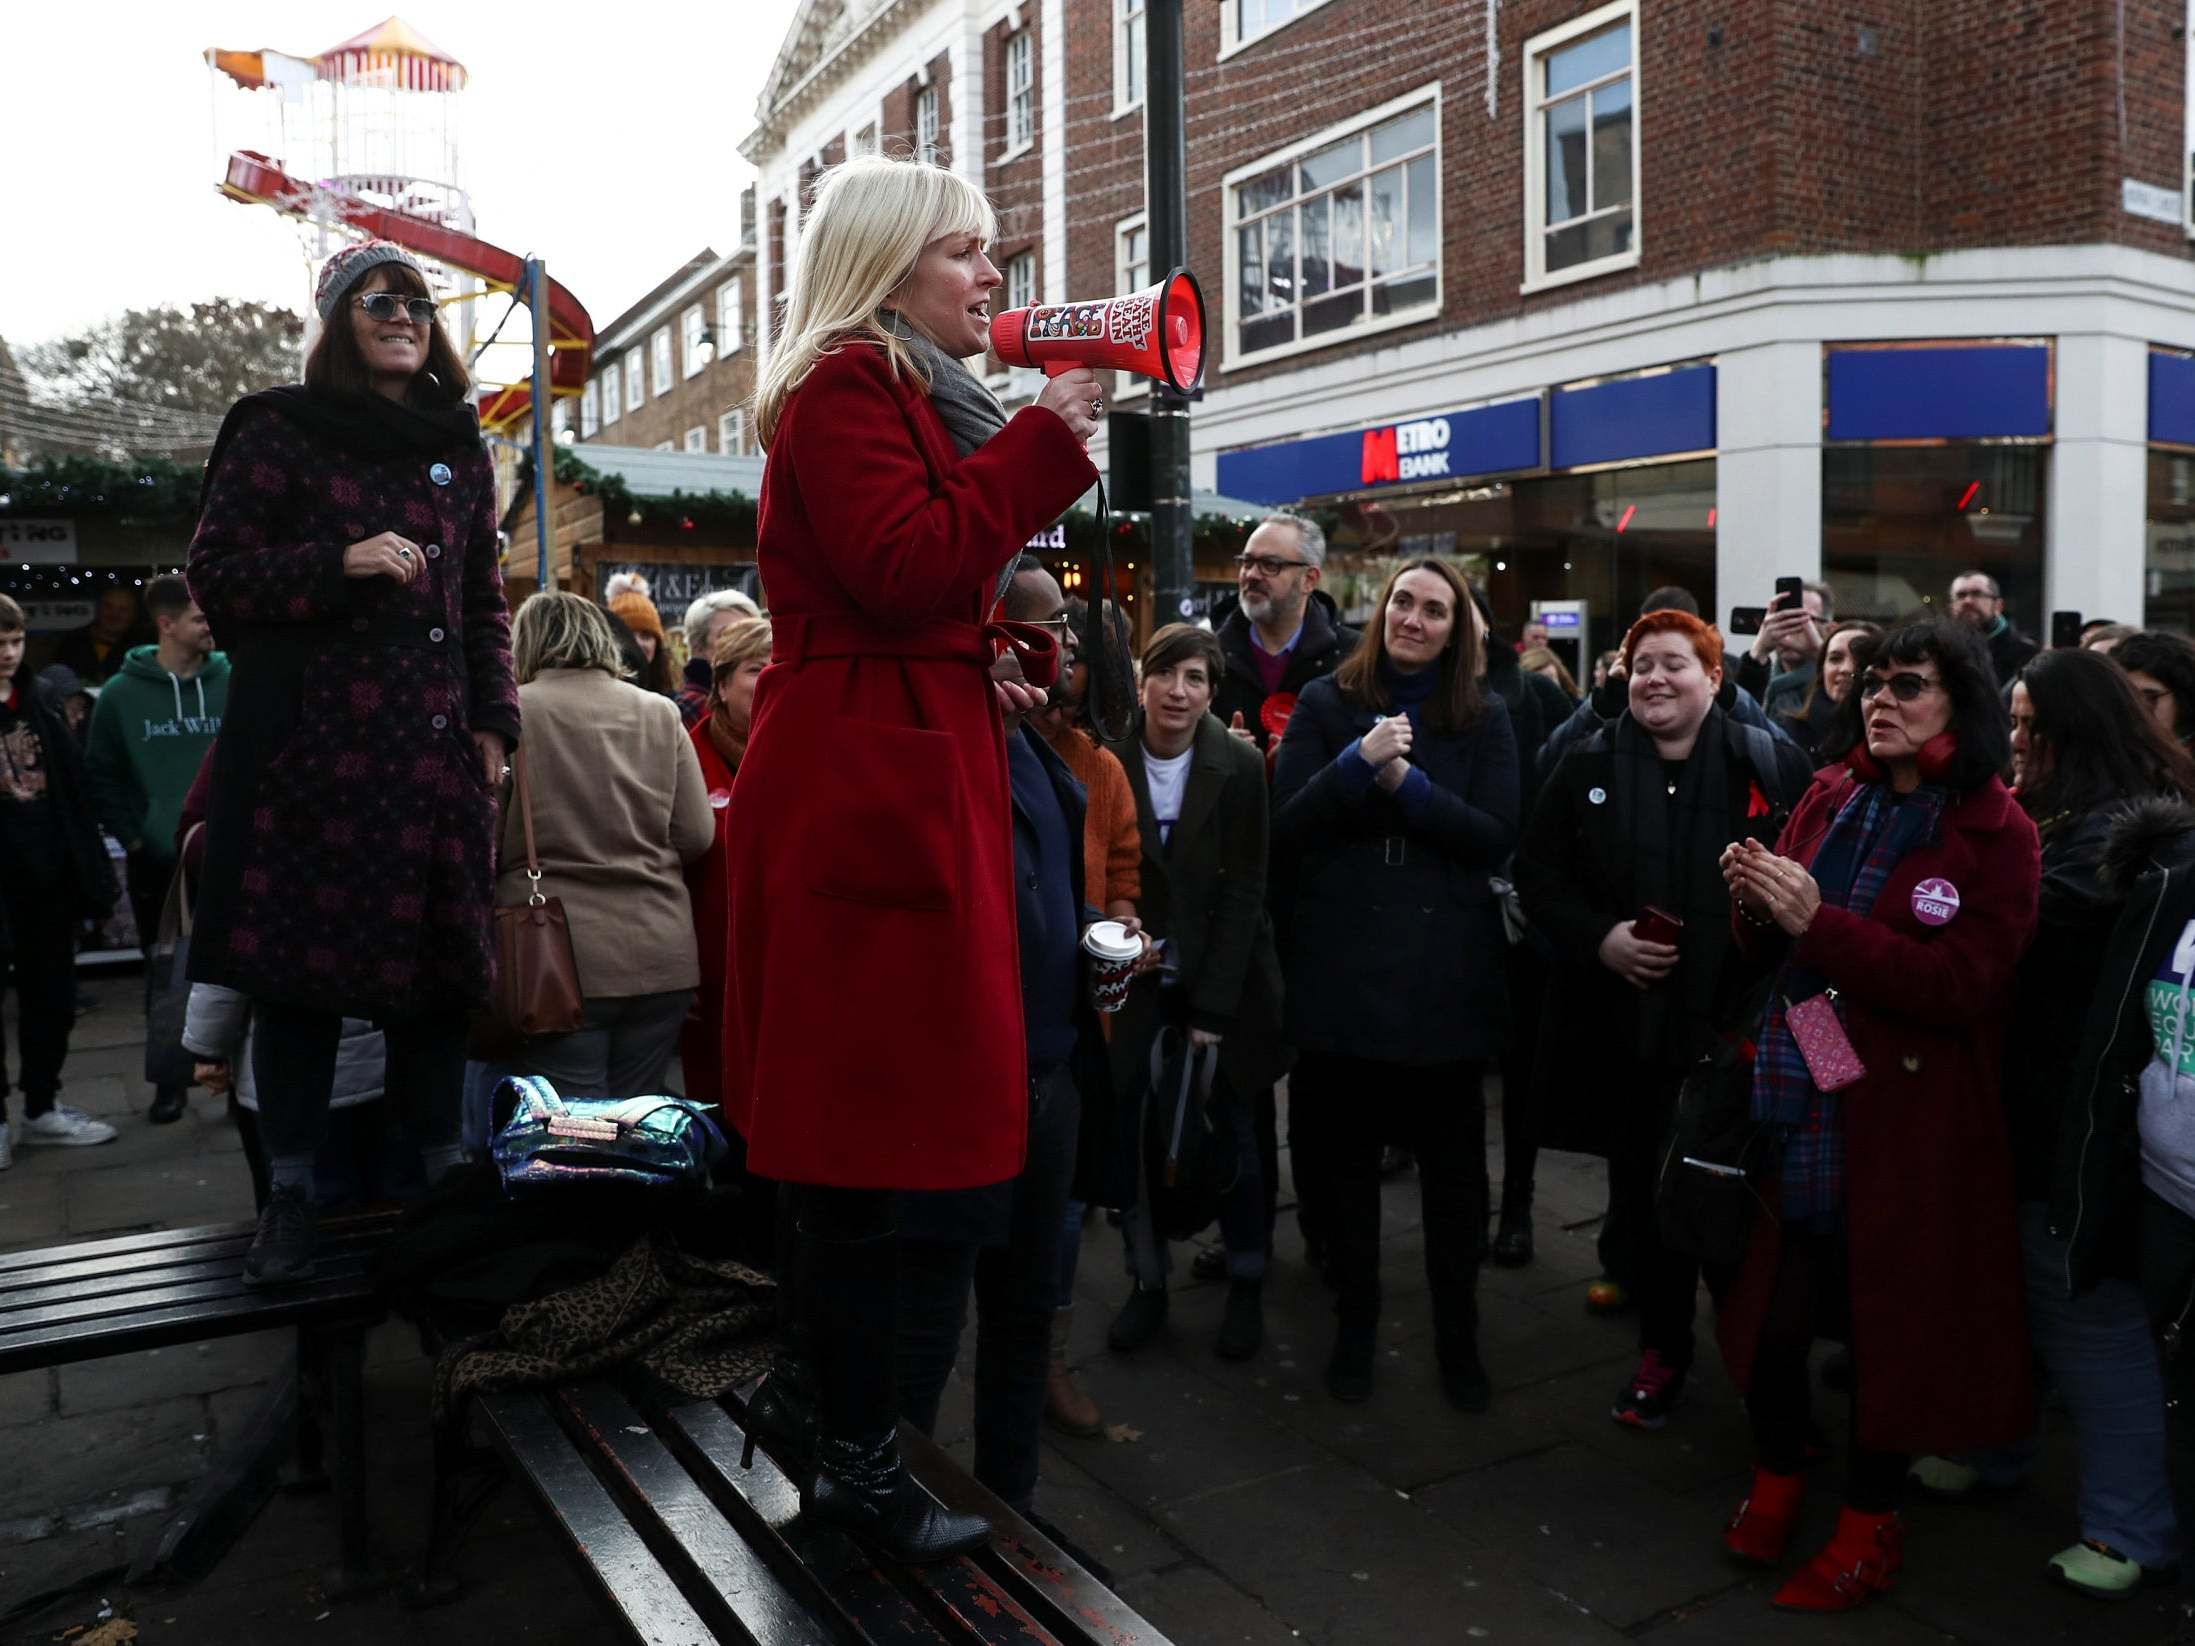 Labour candidate Rosie Duffield campaigns to win her Canterbury seat for a second time